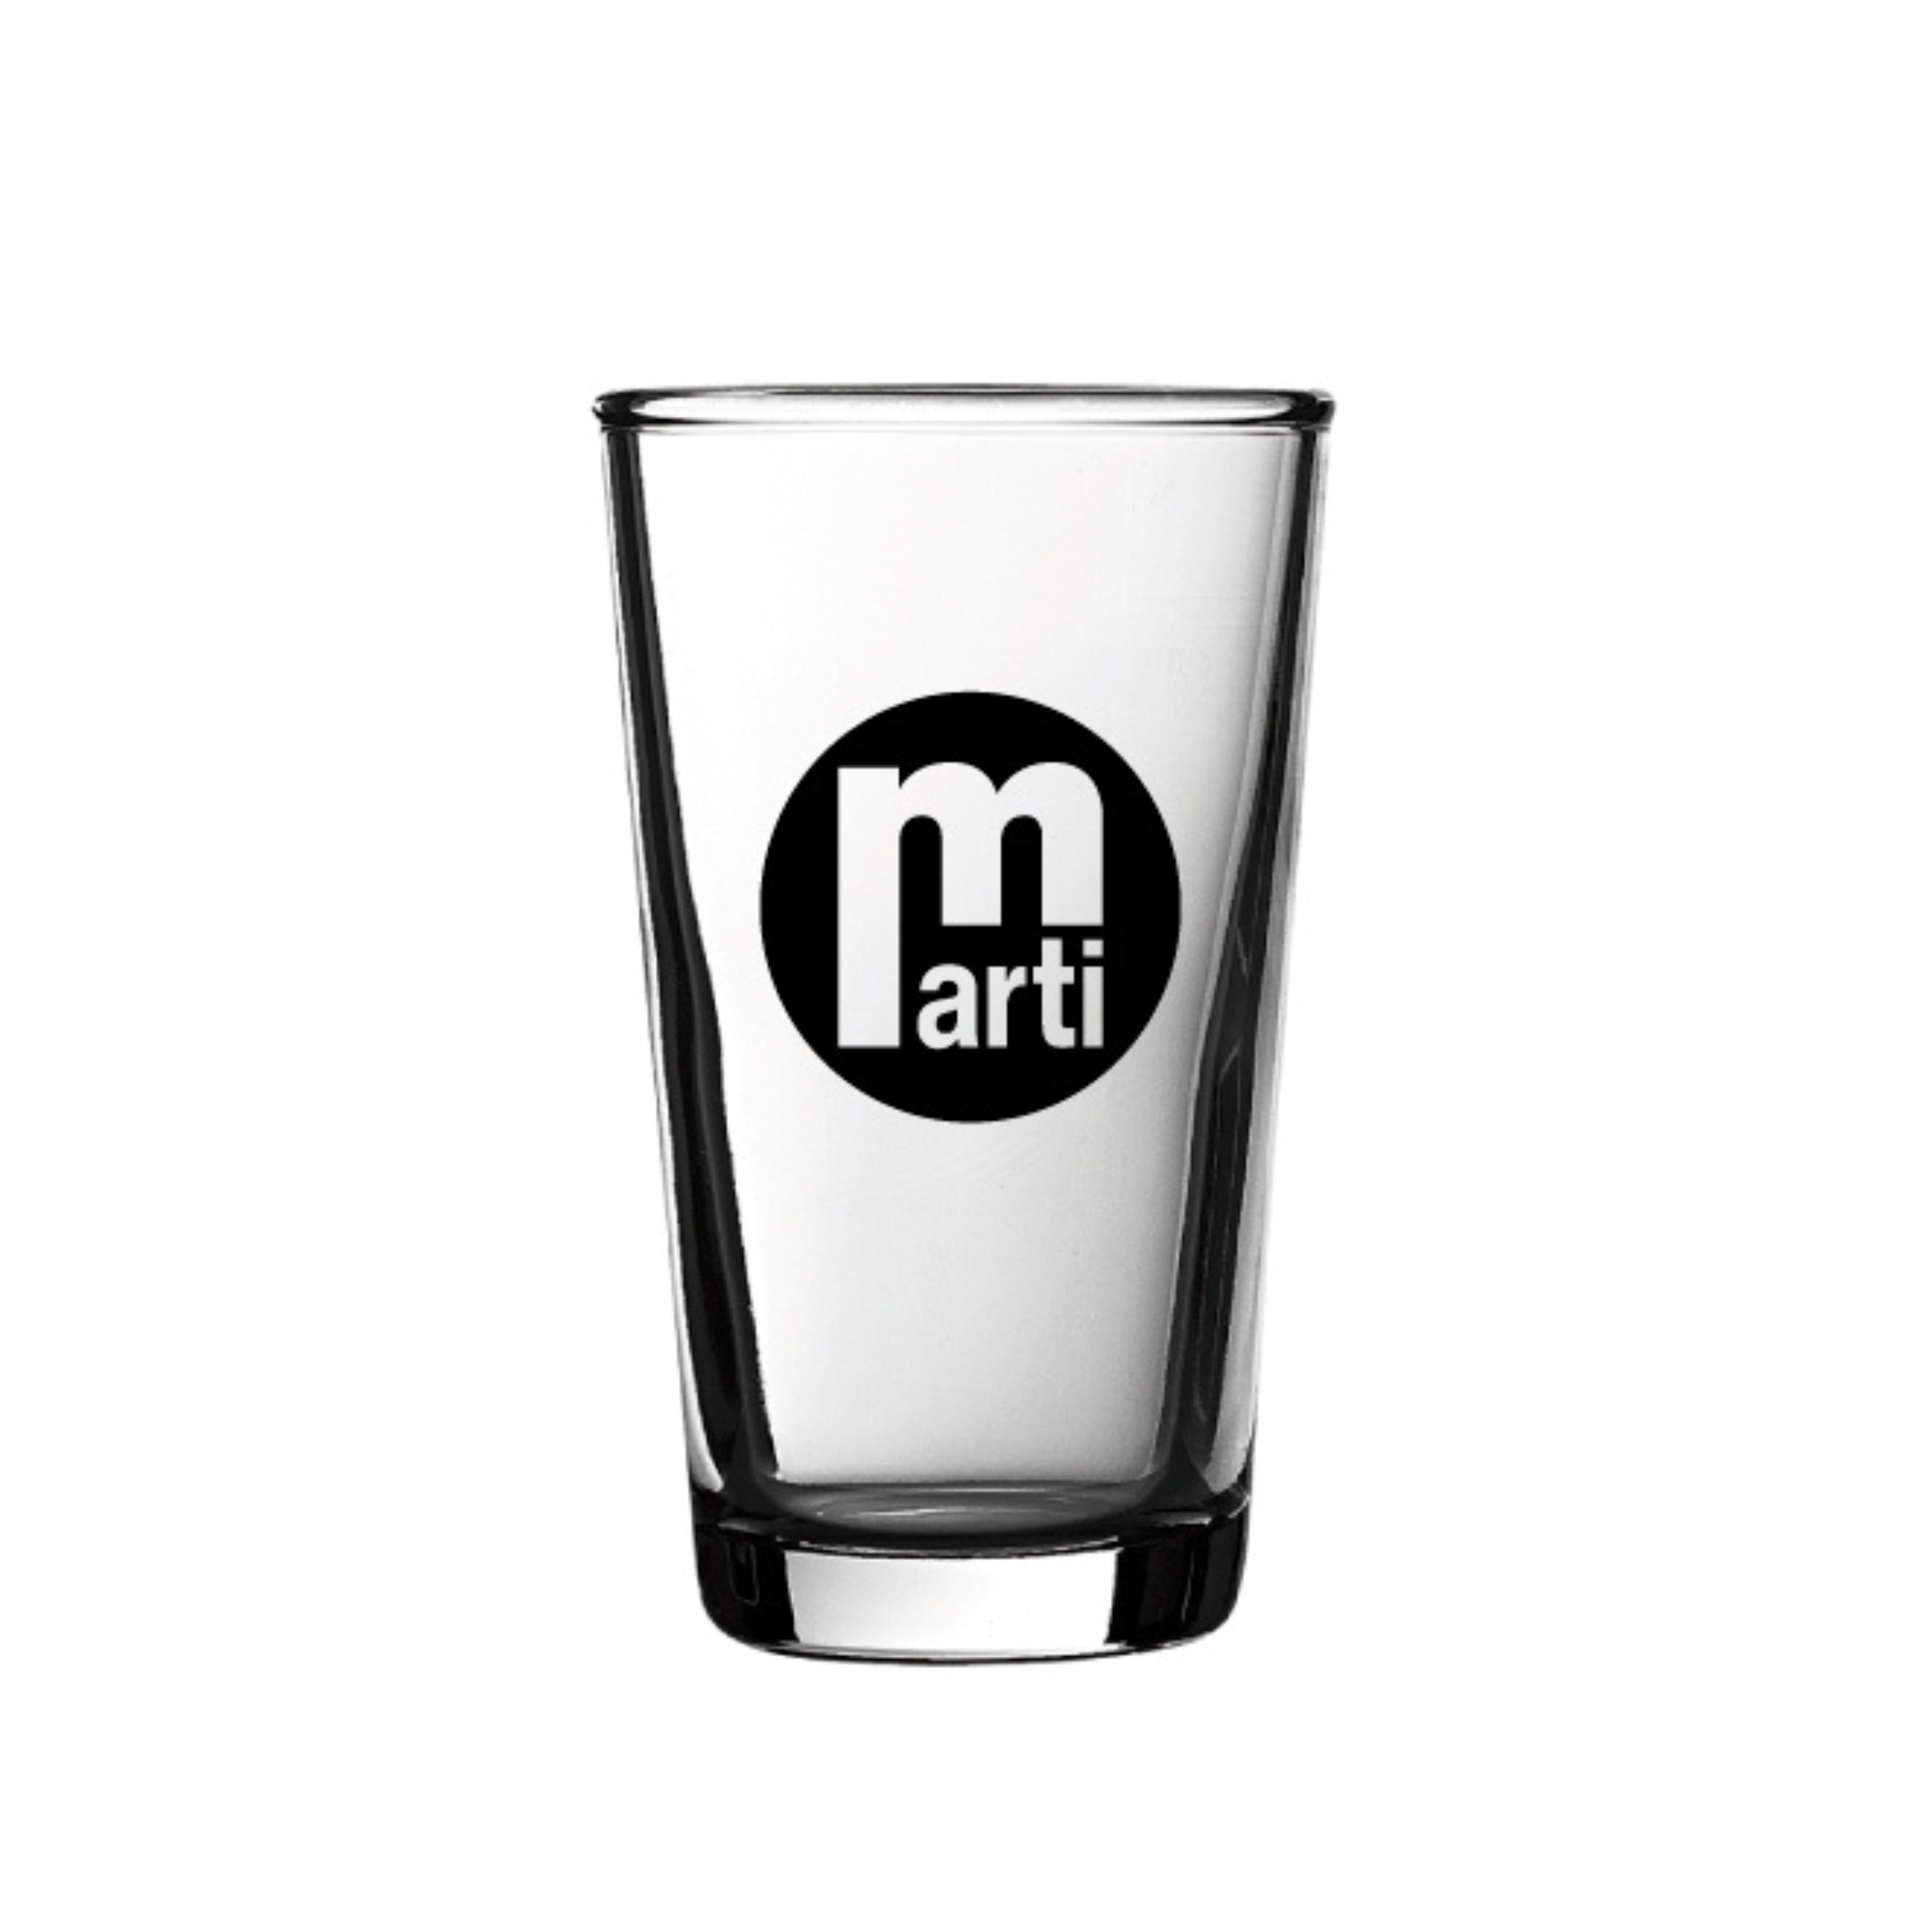 Personalised pint with a black graphic design of marti